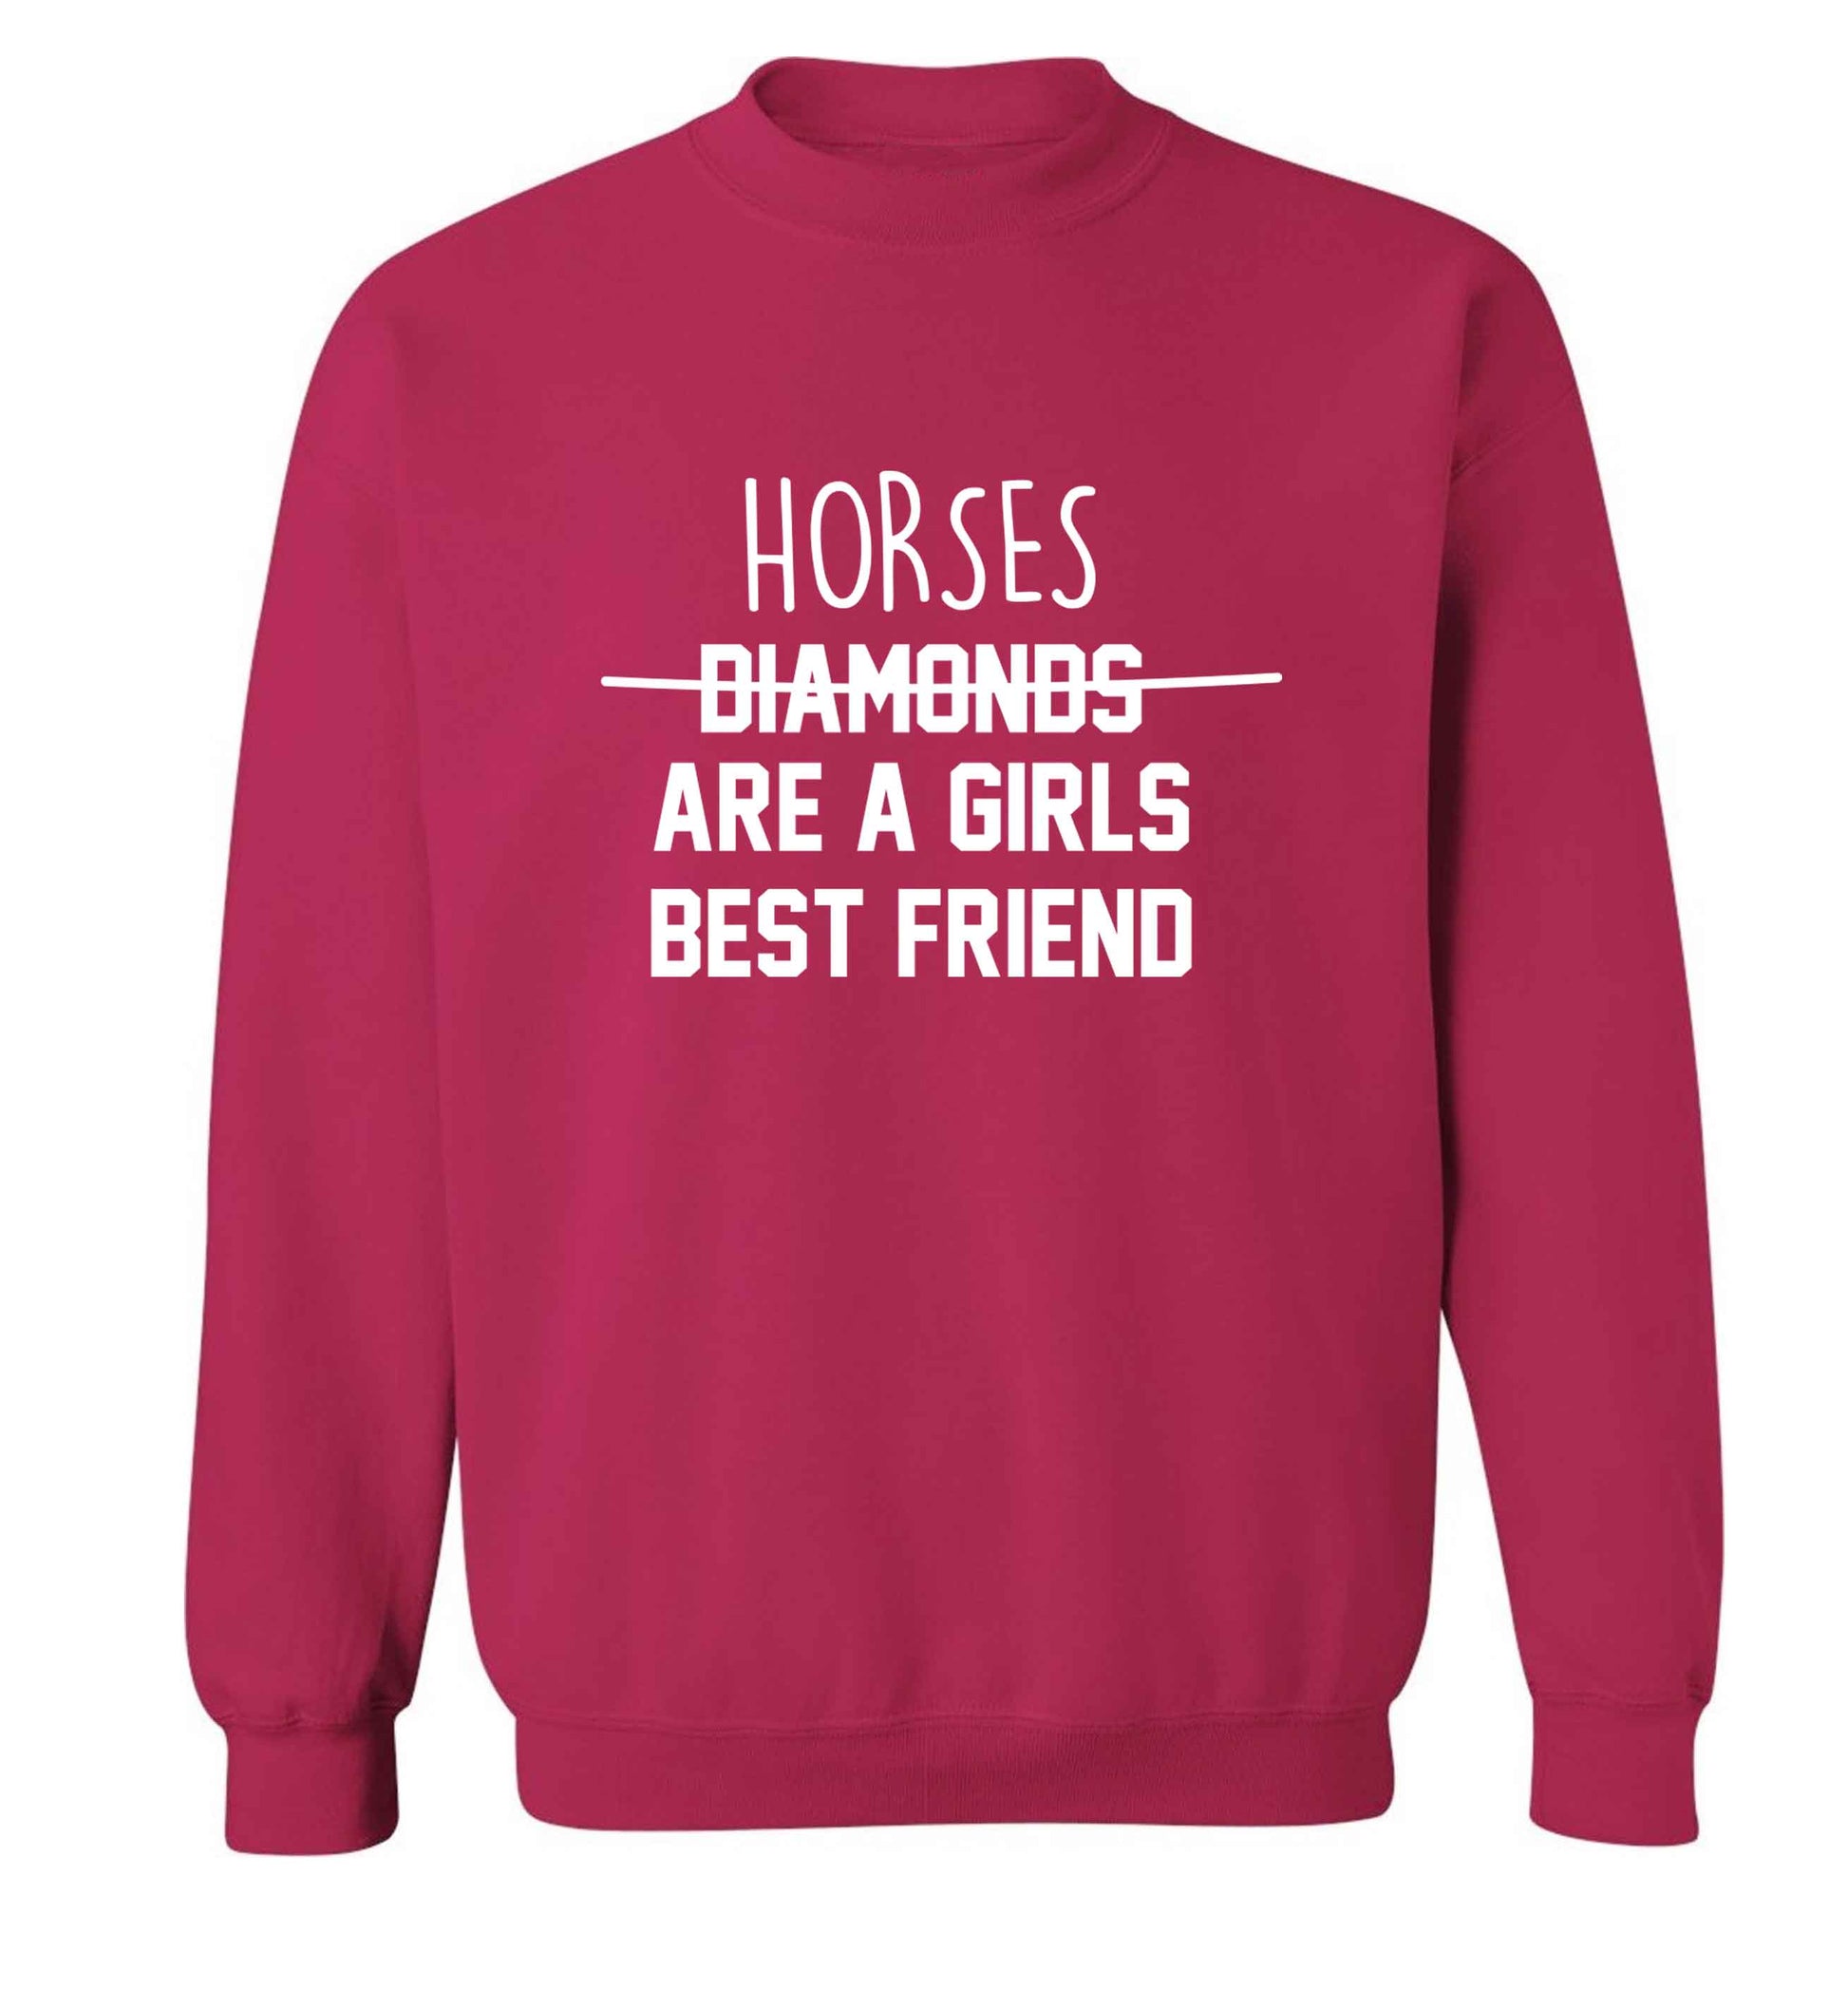 Horses are a girls best friend adult's unisex pink sweater 2XL